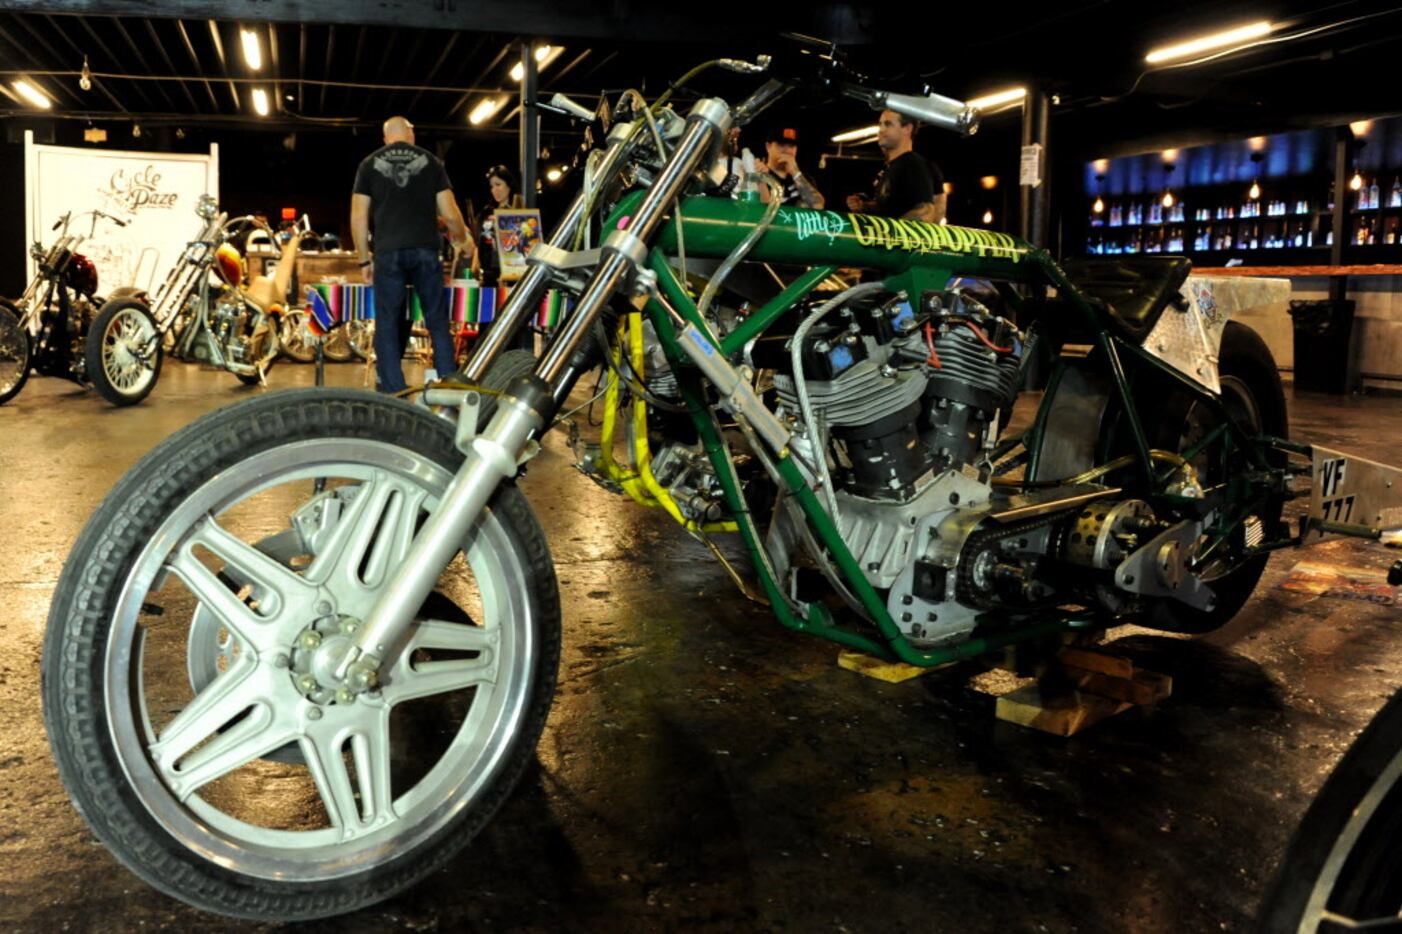 This drag racing bike called the Little Grasshopper is on display at the Southern Throwdown...